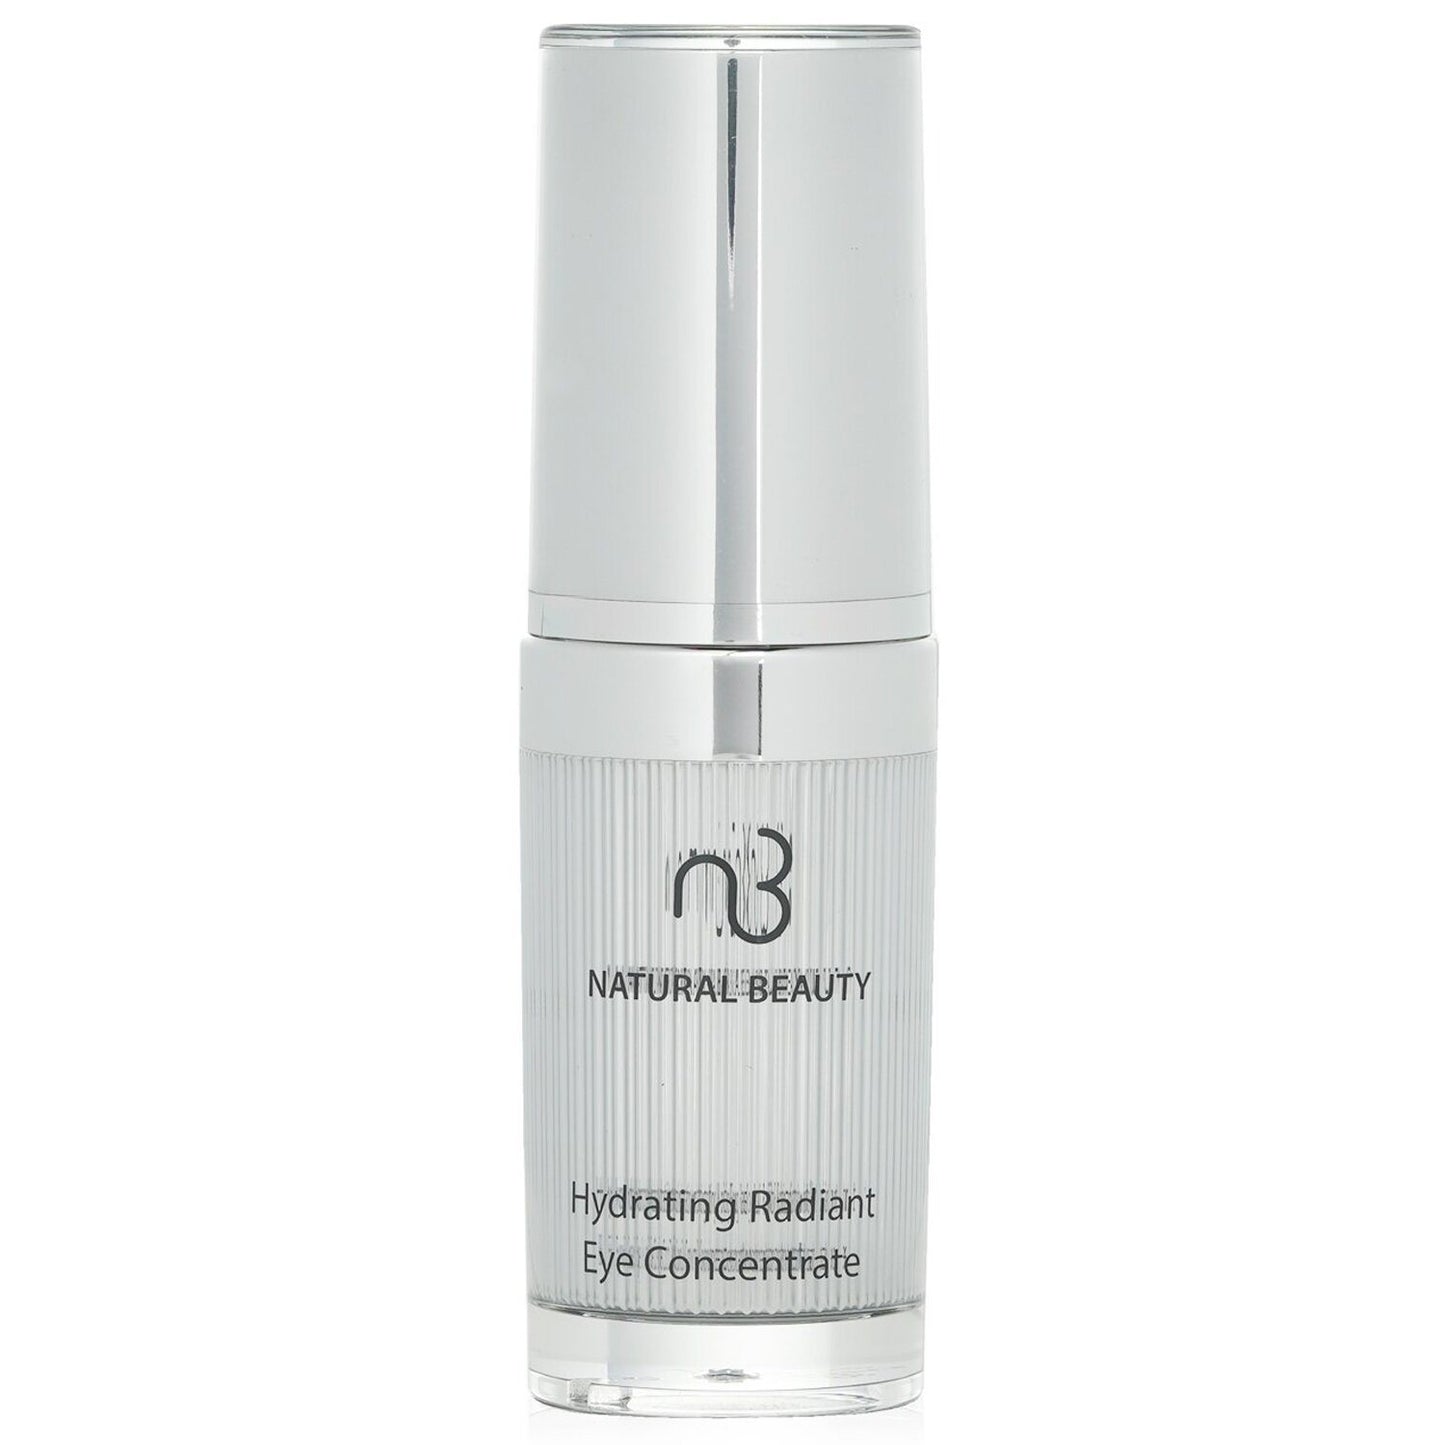 NATURAL BEAUTY - Hydrating Radiant Eye Concentrate 81D801-4 15ml/0.5oz - lolaluxeshop